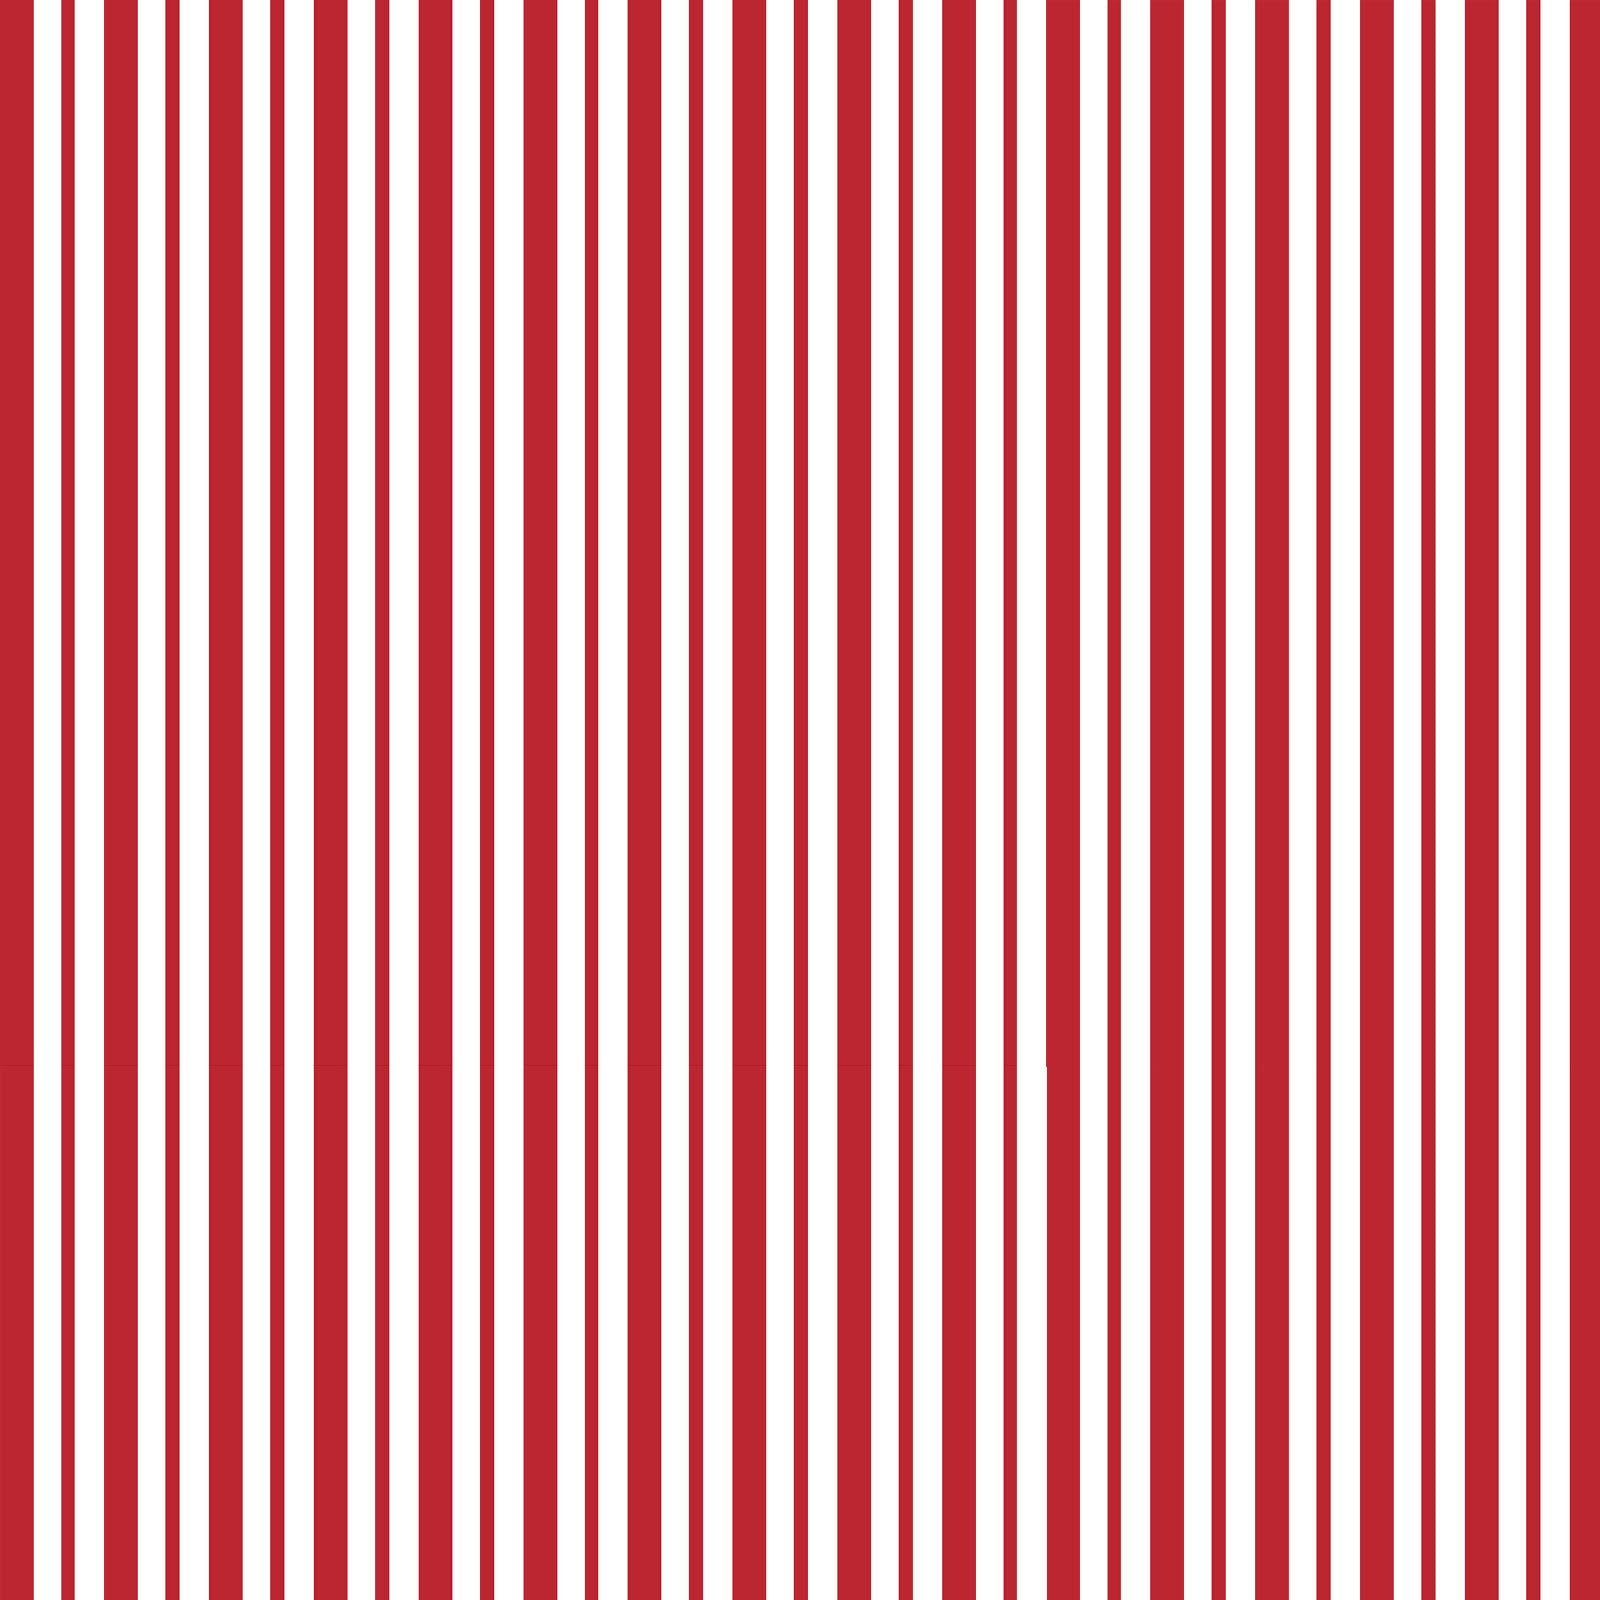 Mini Awning Stripe in red (MAS8249-R) is part of the Kimberbell Basics line designed by Kim Christopherson for Maywood Studio. This fabric features red stripes in two sizes on a white background, and adds a soft red texture to projects.